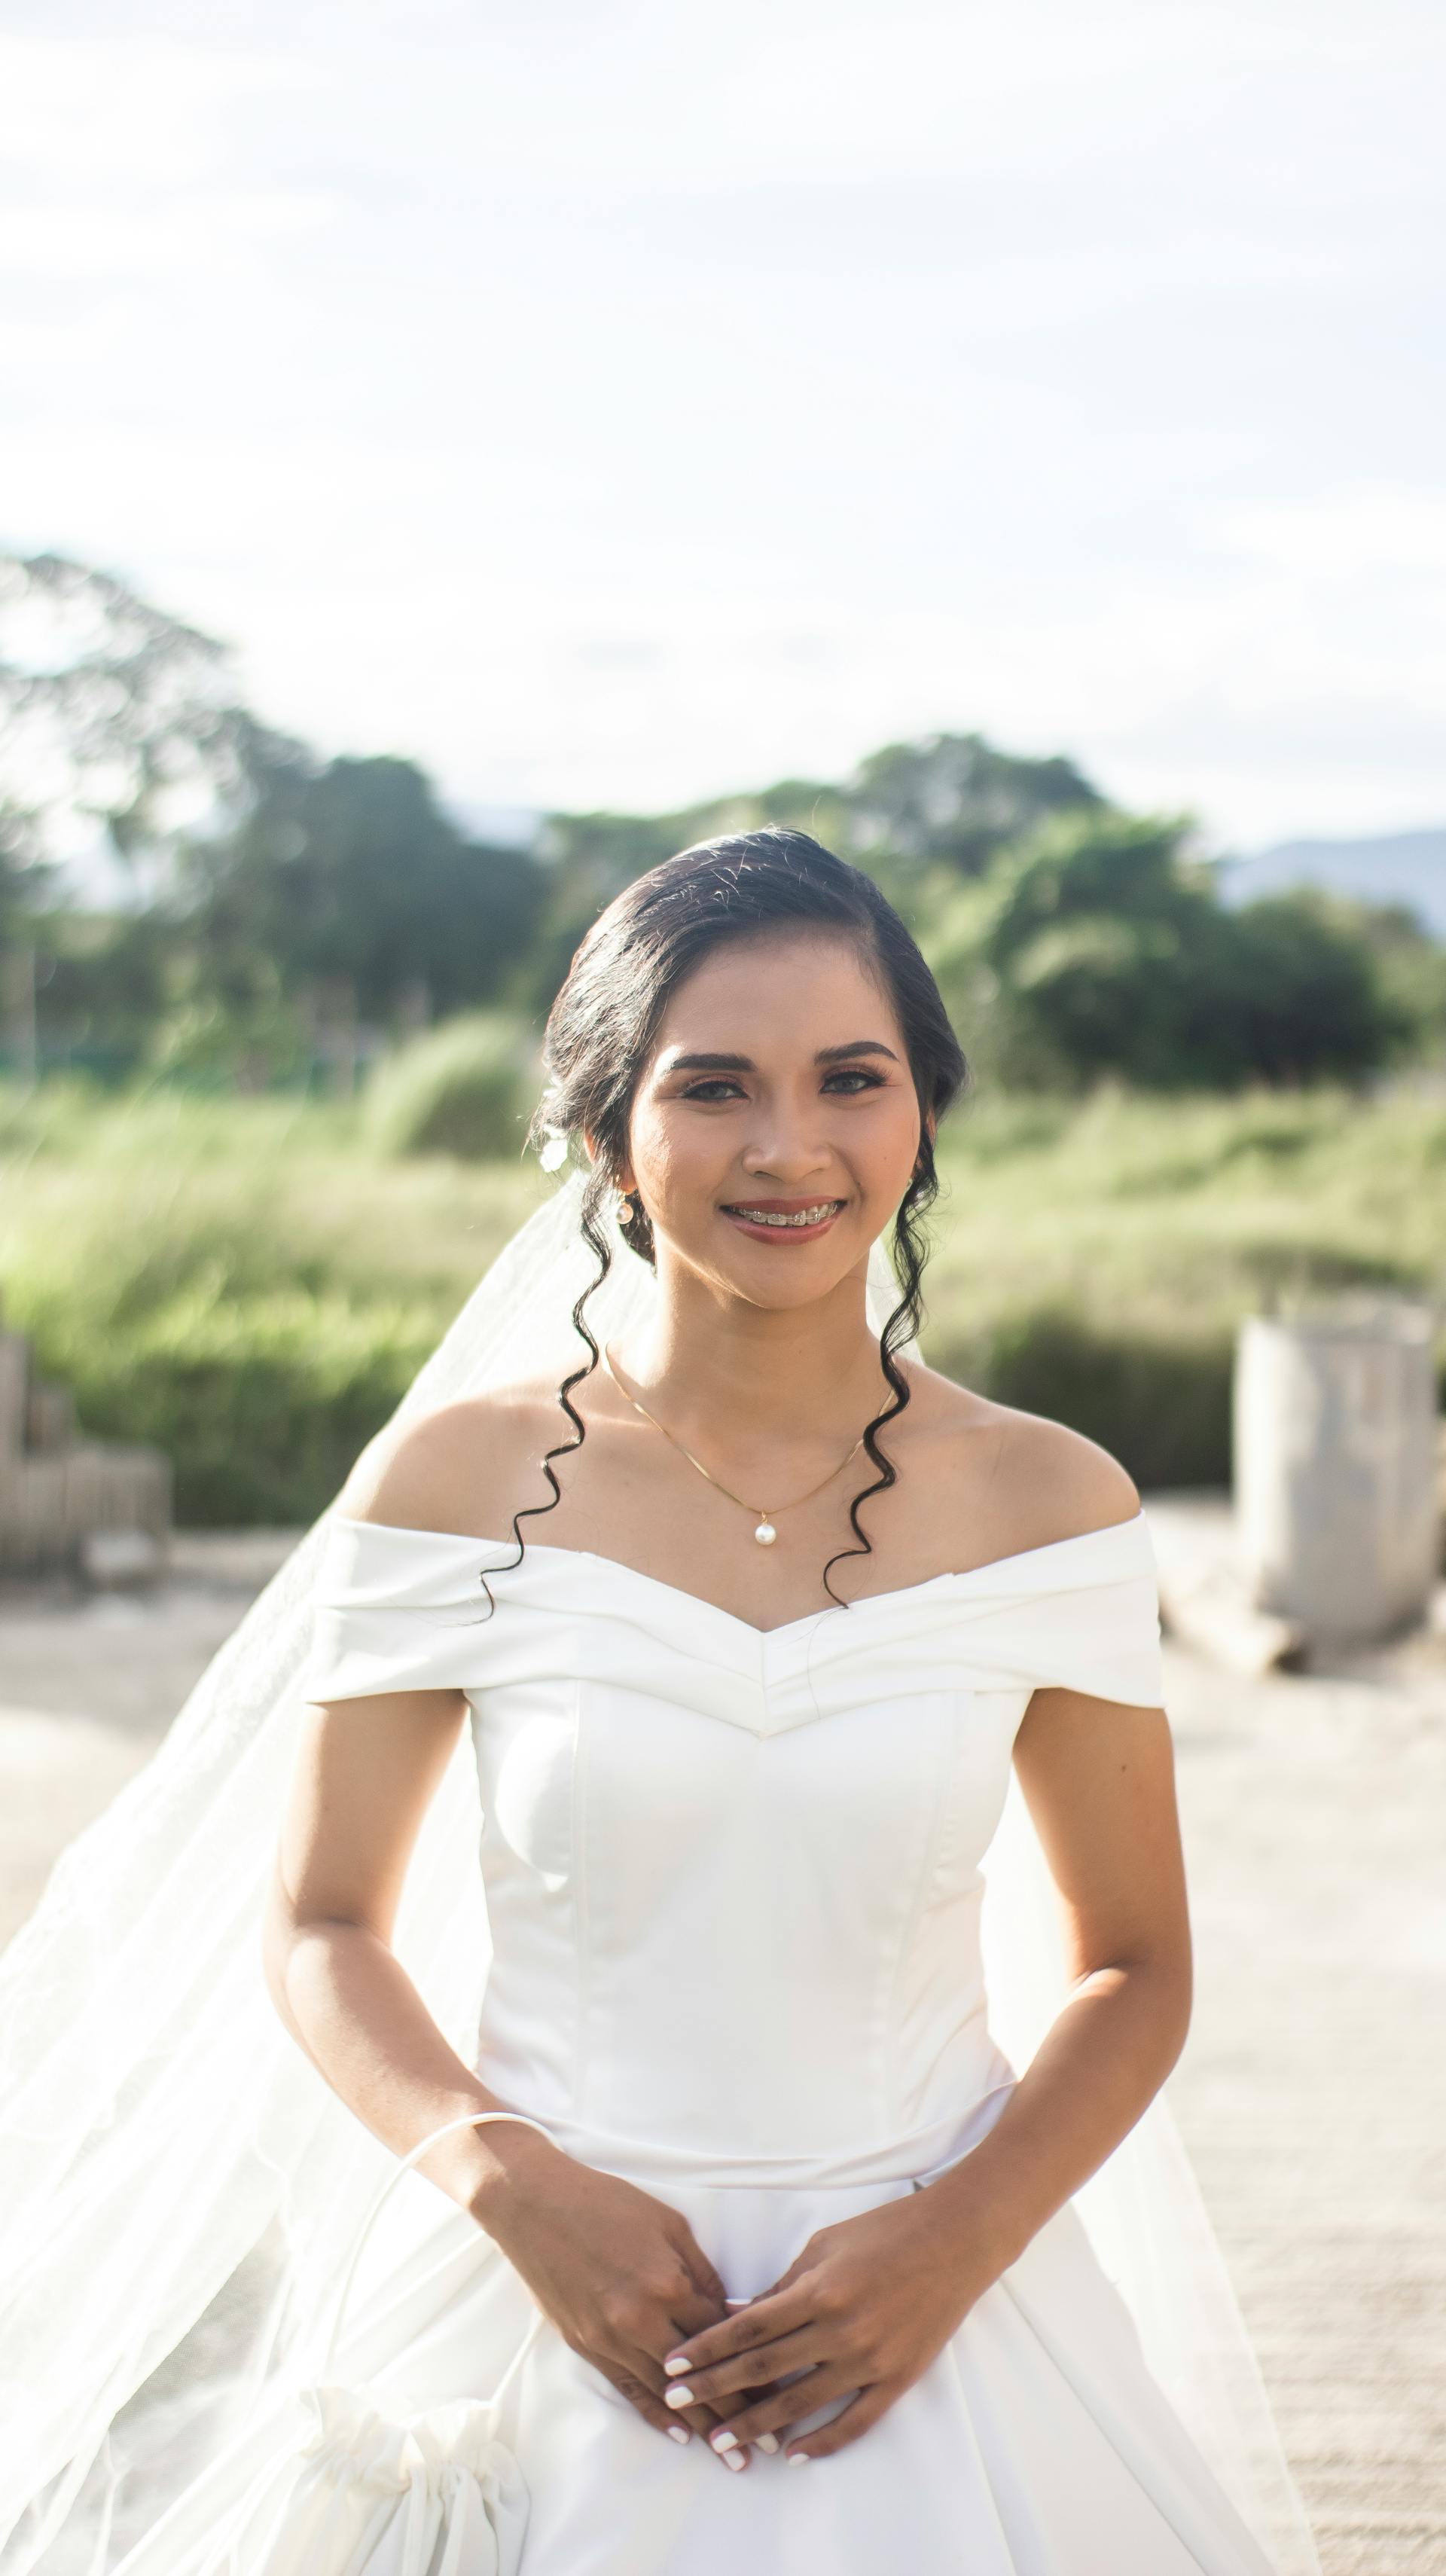 A bride standing outdoors on a sunny day | Source: Pexels